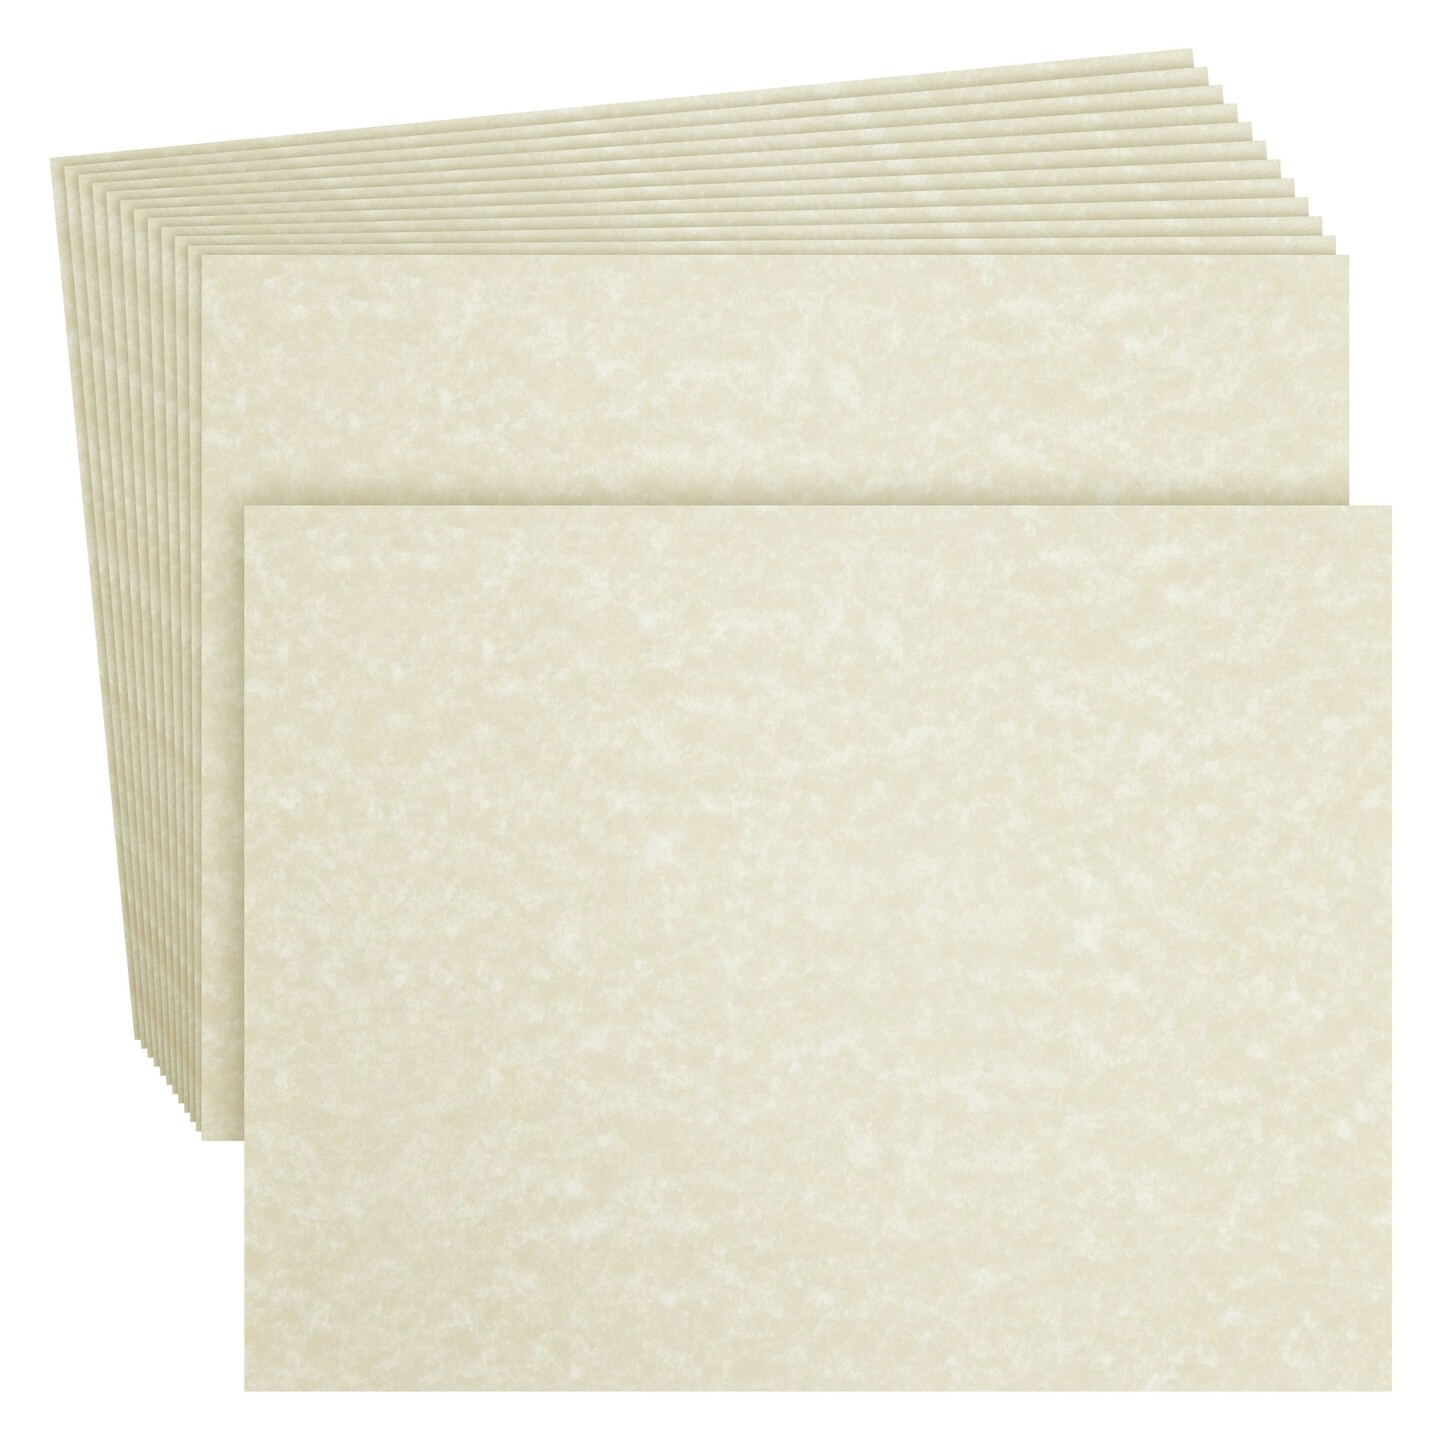 96 Sheets Parchment Paper For Certificates, Resumes, Diplomas, 90 GSM  Textured Stationary, Printer-Friendly (Ivory, 8.5 X 11 In)